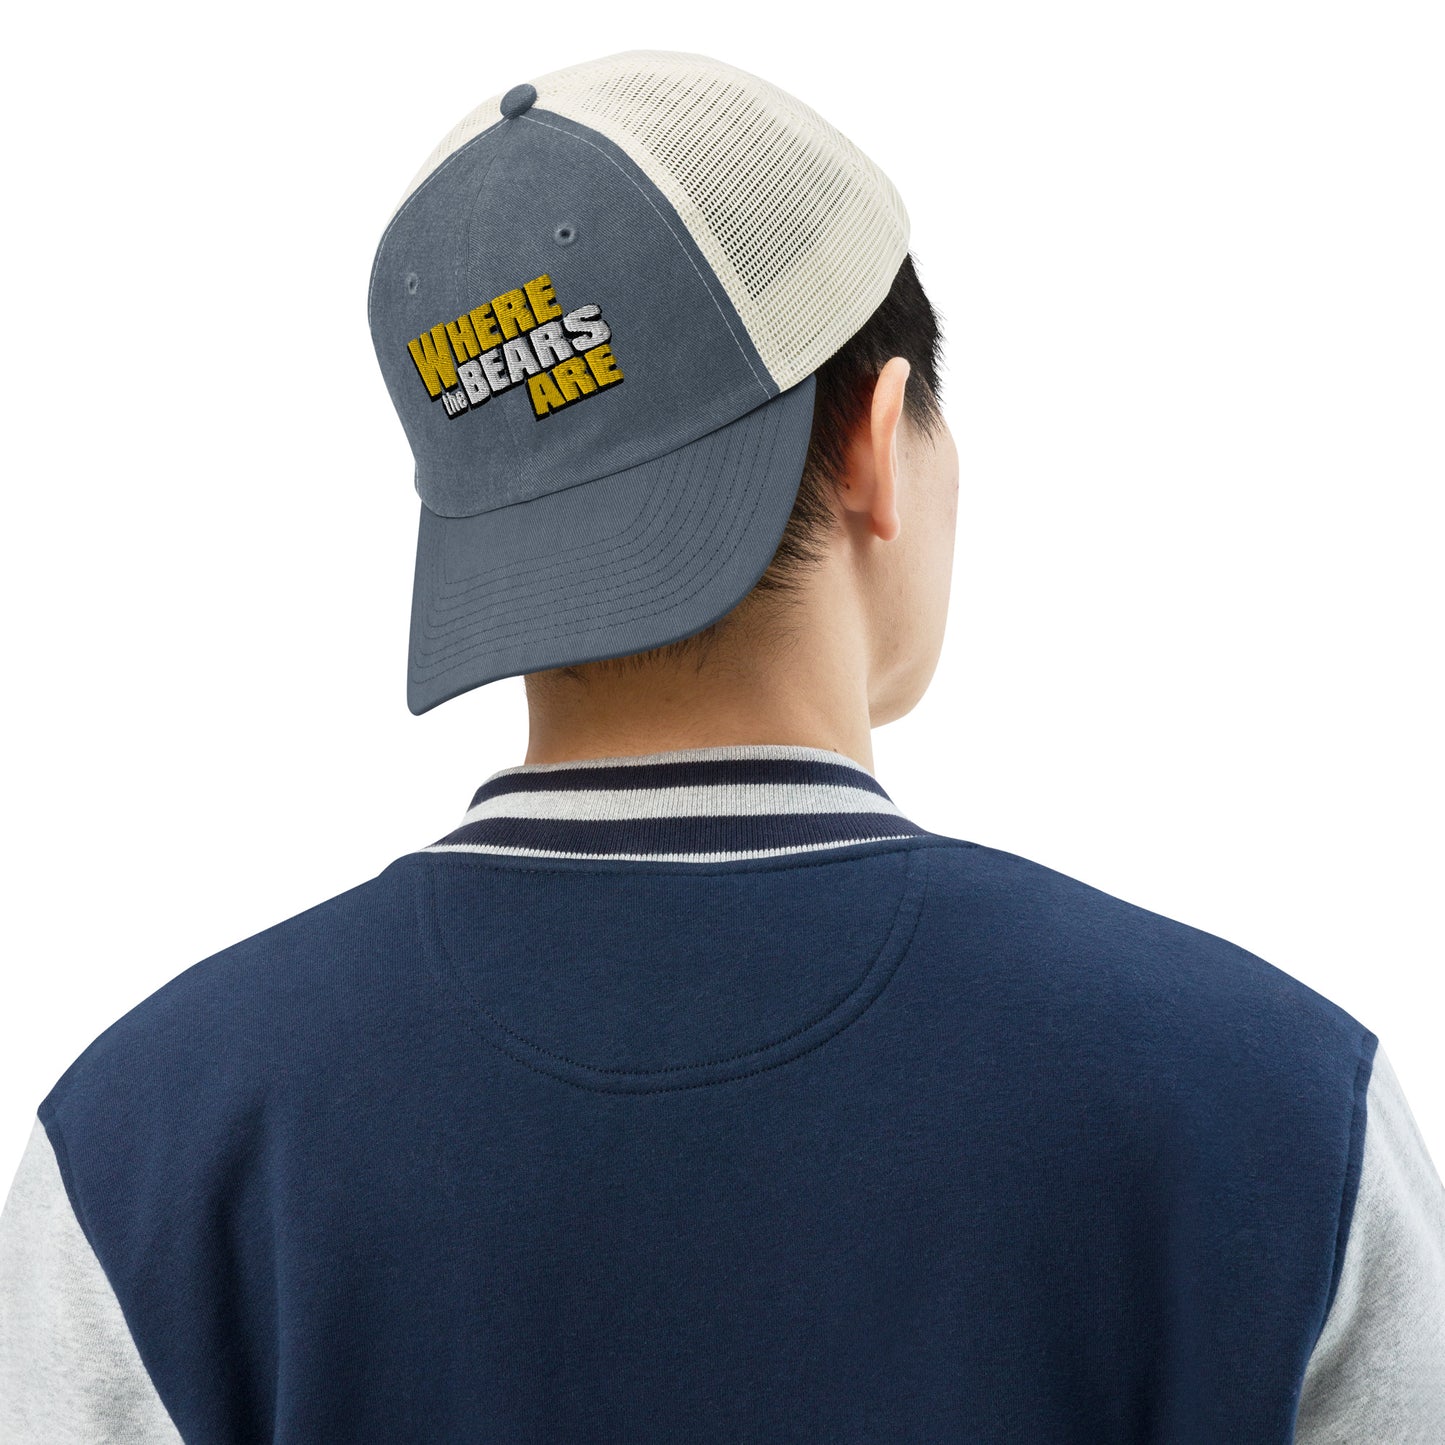 'Where The Bears Are' Embroidered Logo Pigment-dyed cap